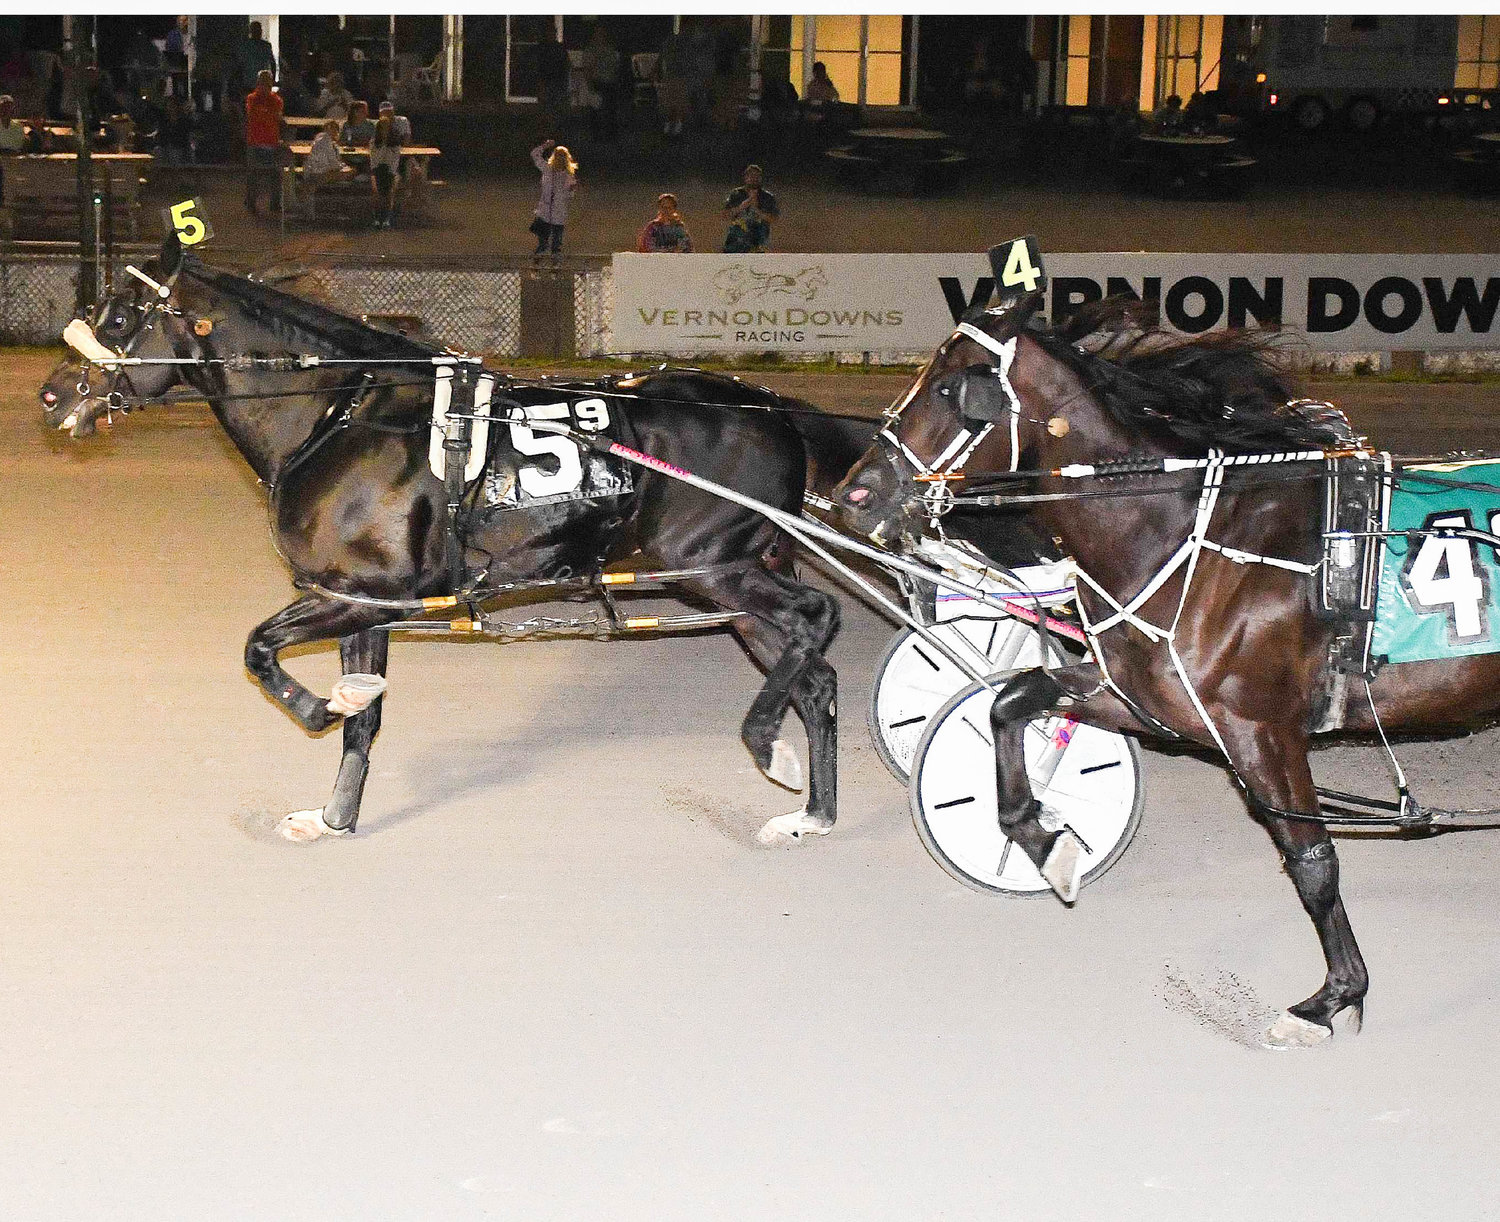 Natameri driven by Frank Affrunti captured the $8,800 Open Pace at Vernon Downs on Saturday night.